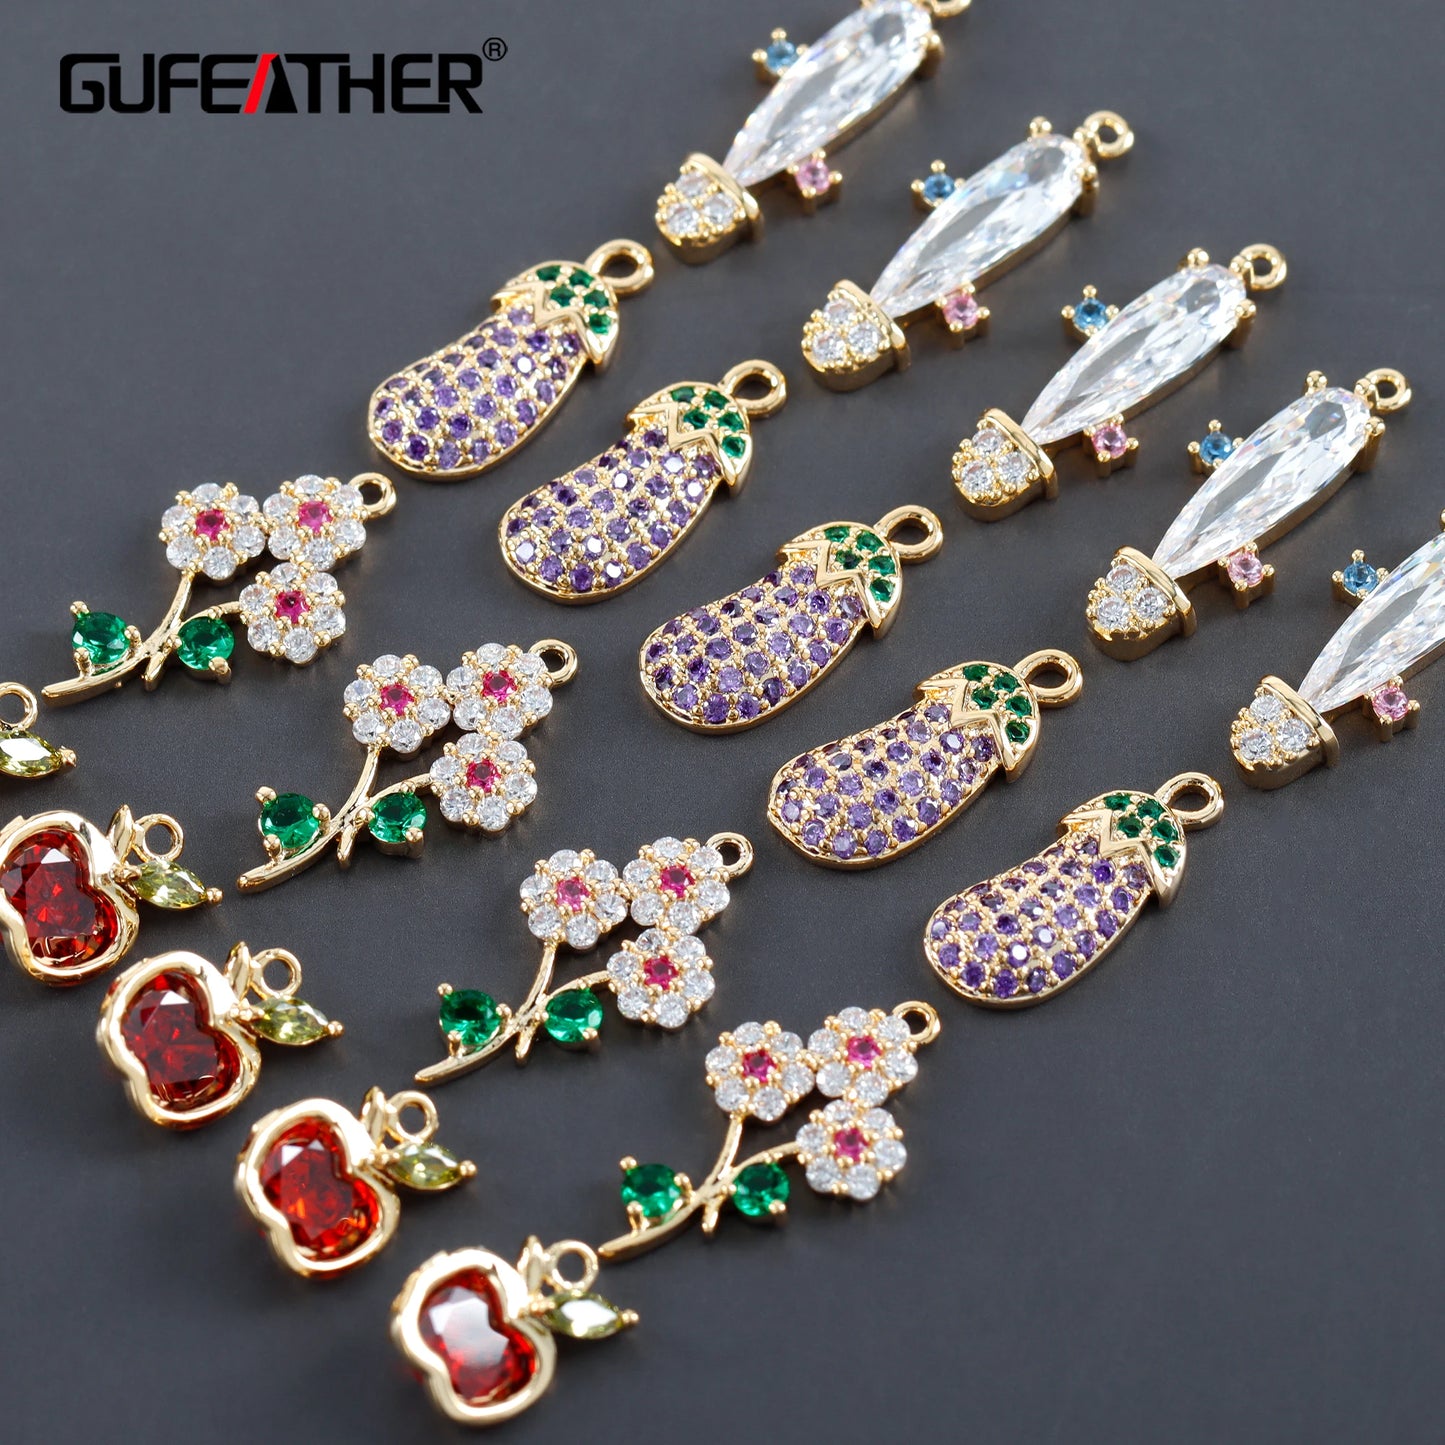 GUFEATHER M1008,jewelry accessories,pass REACH,nickel free,18k gold plated,copper,zircons,diy earrings,jewelry making,6pcs/lot